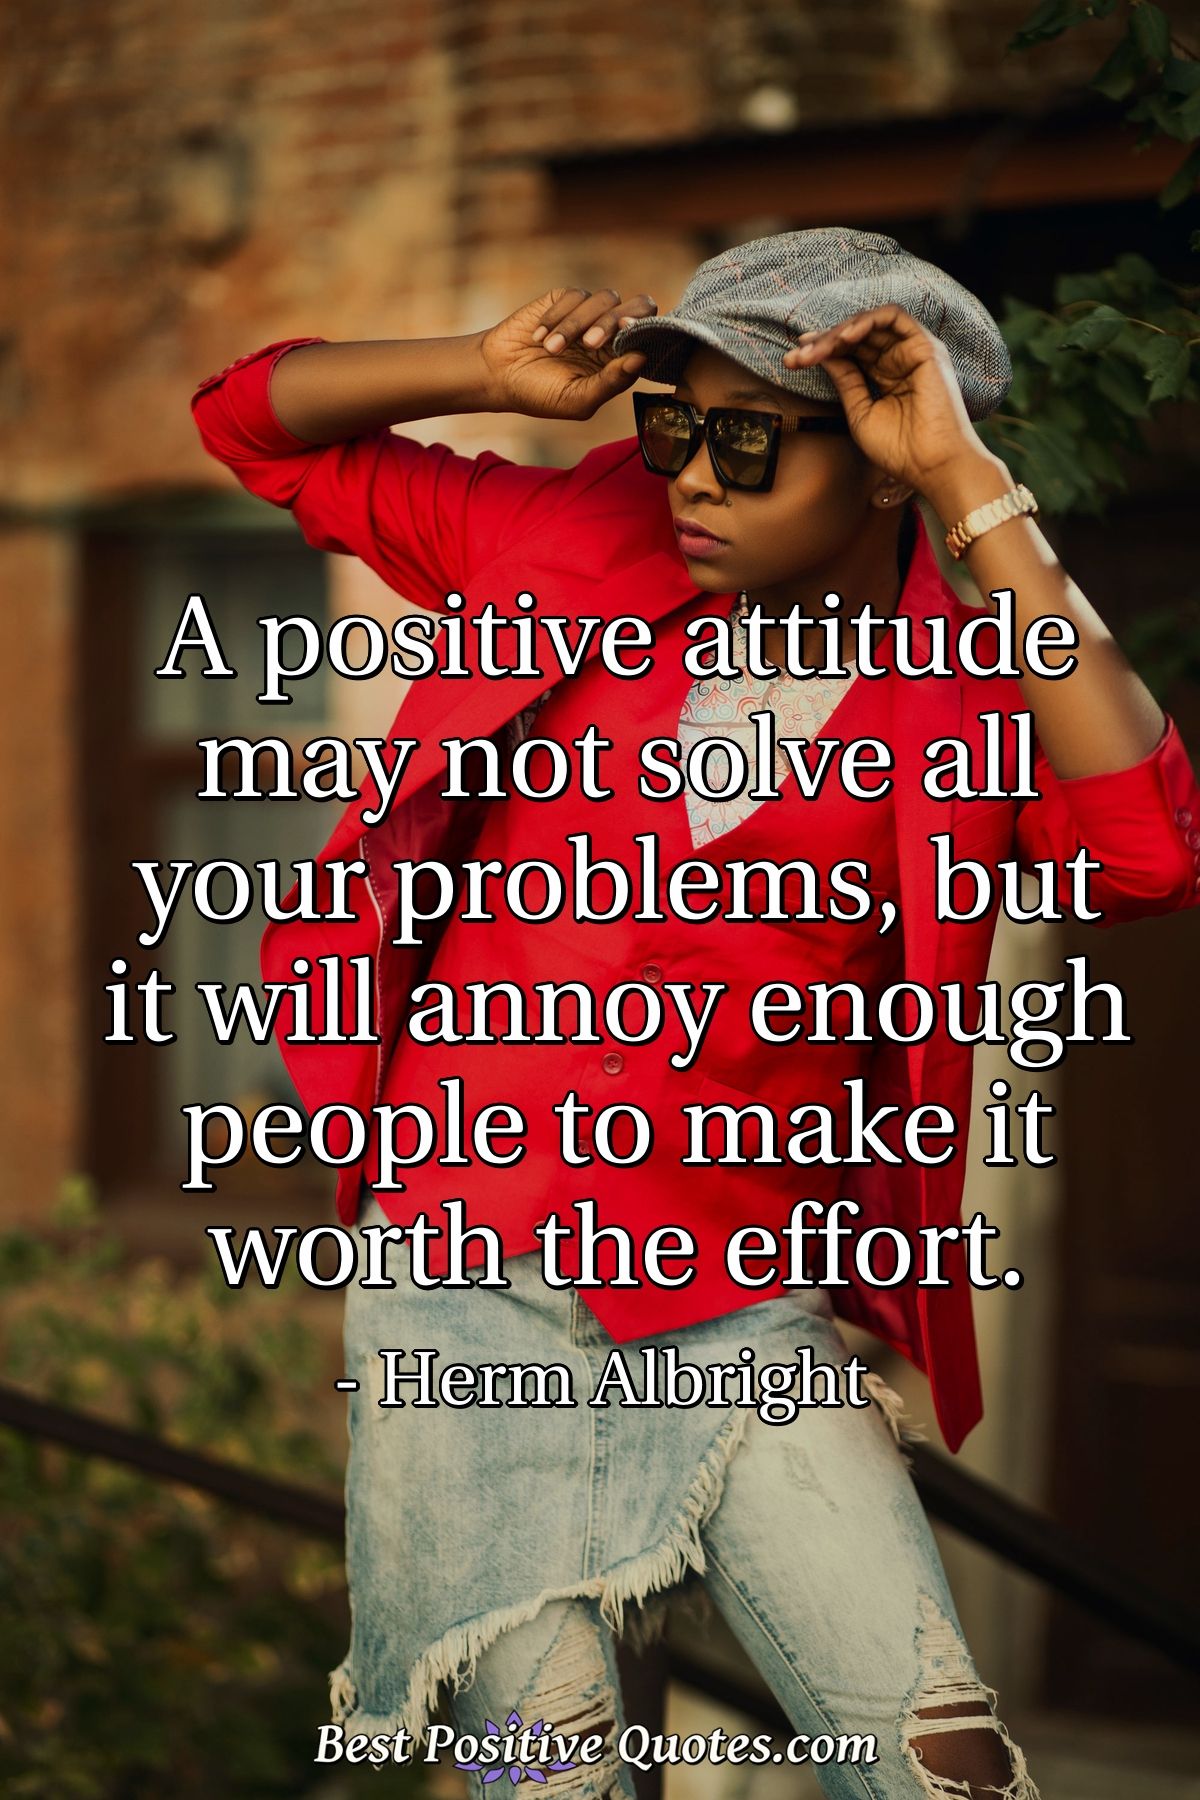 A positive attitude may not solve all your problems, but it will annoy enough people to make it worth the effort. - Herm Albright